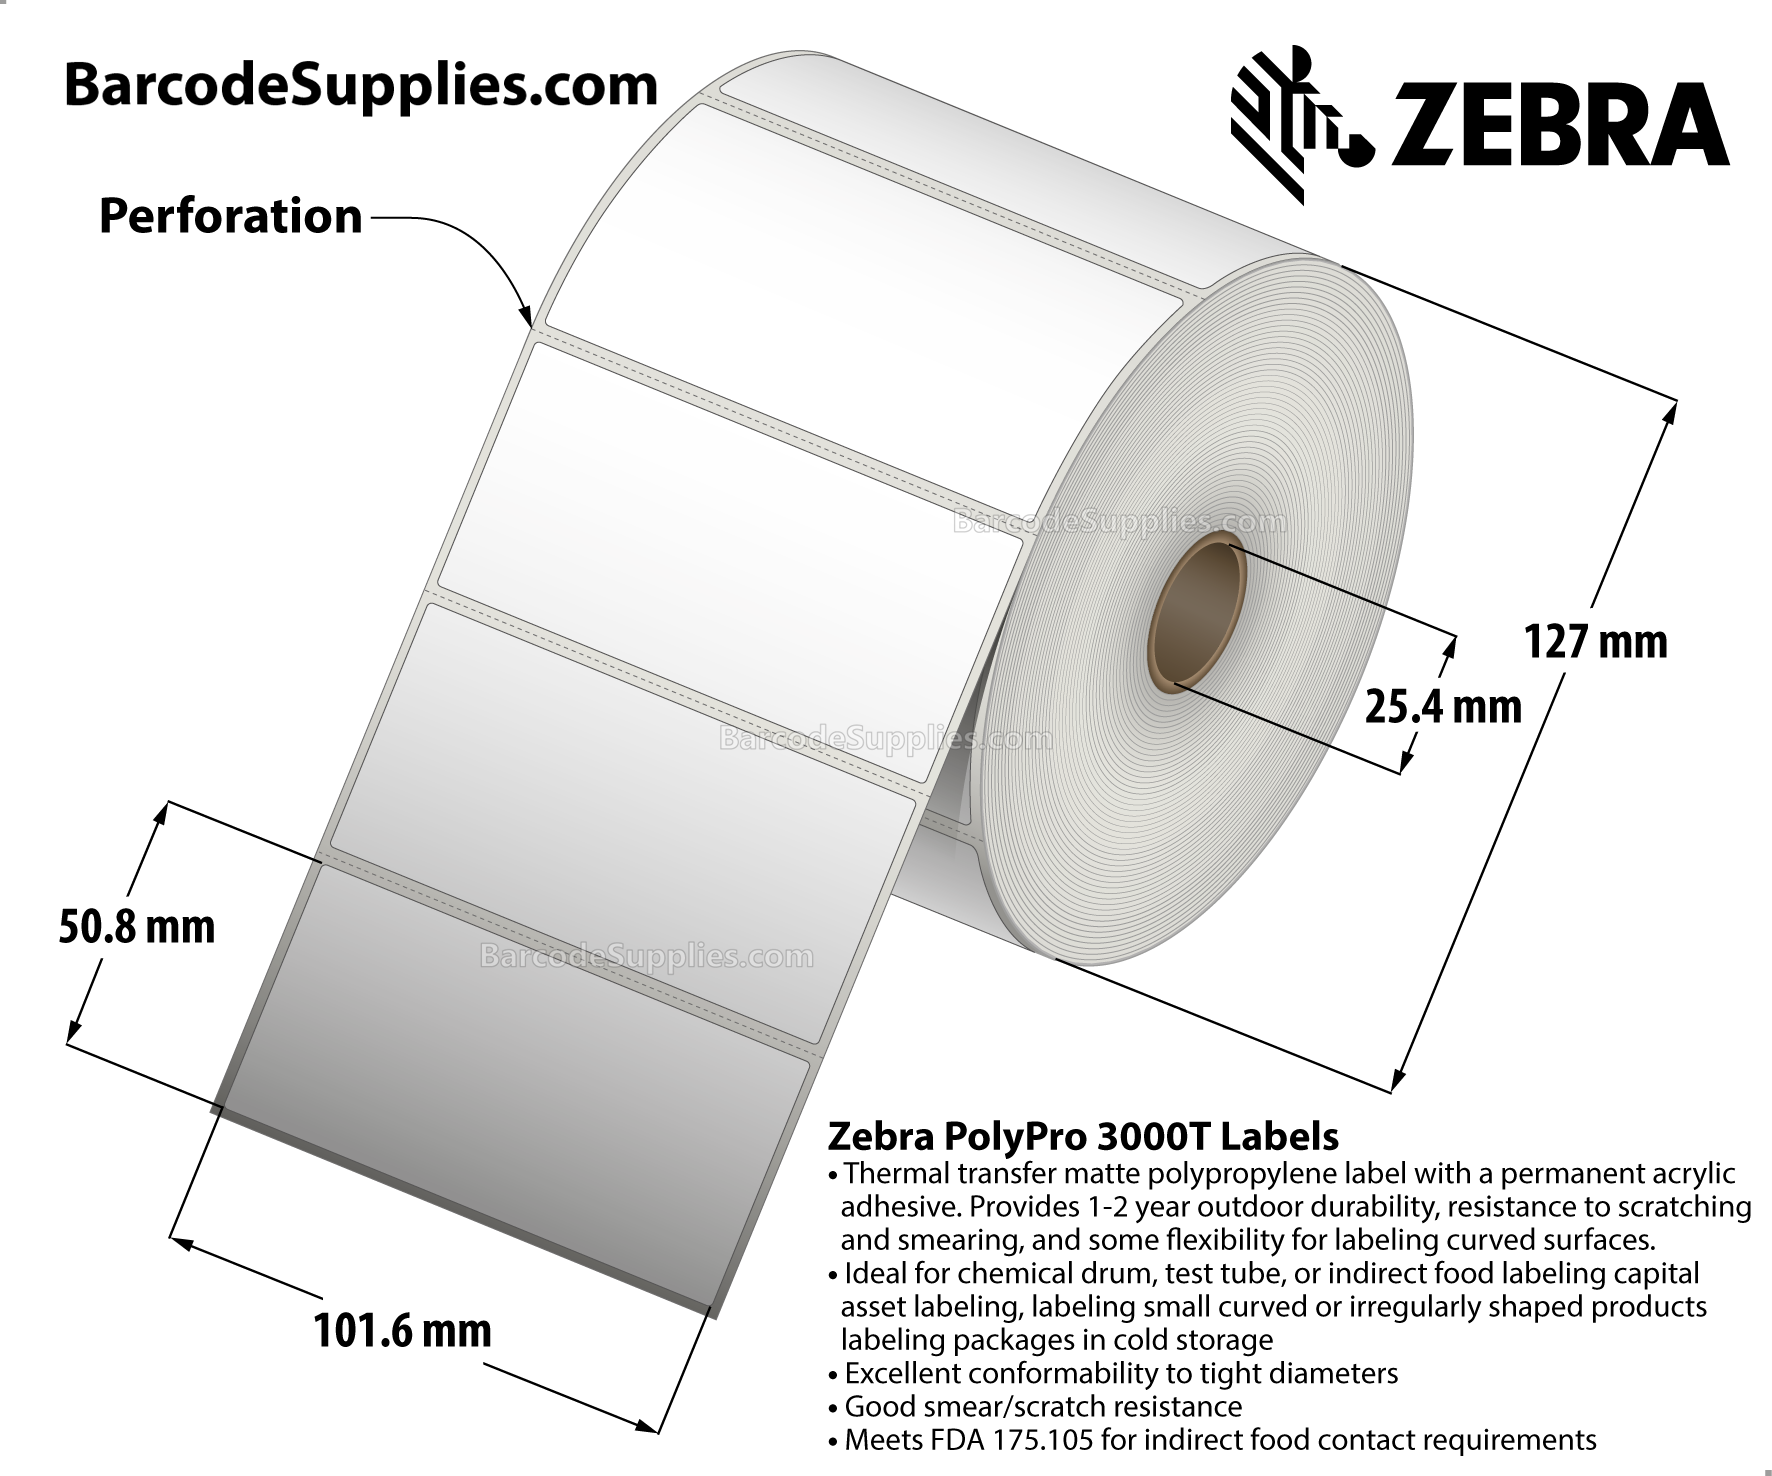 4 x 2 Thermal Transfer White PolyPro 3000T Labels With Permanent Adhesive - Perforated - 1110 Labels Per Roll - Carton Of 4 Rolls - 4440 Labels Total - MPN: 18932